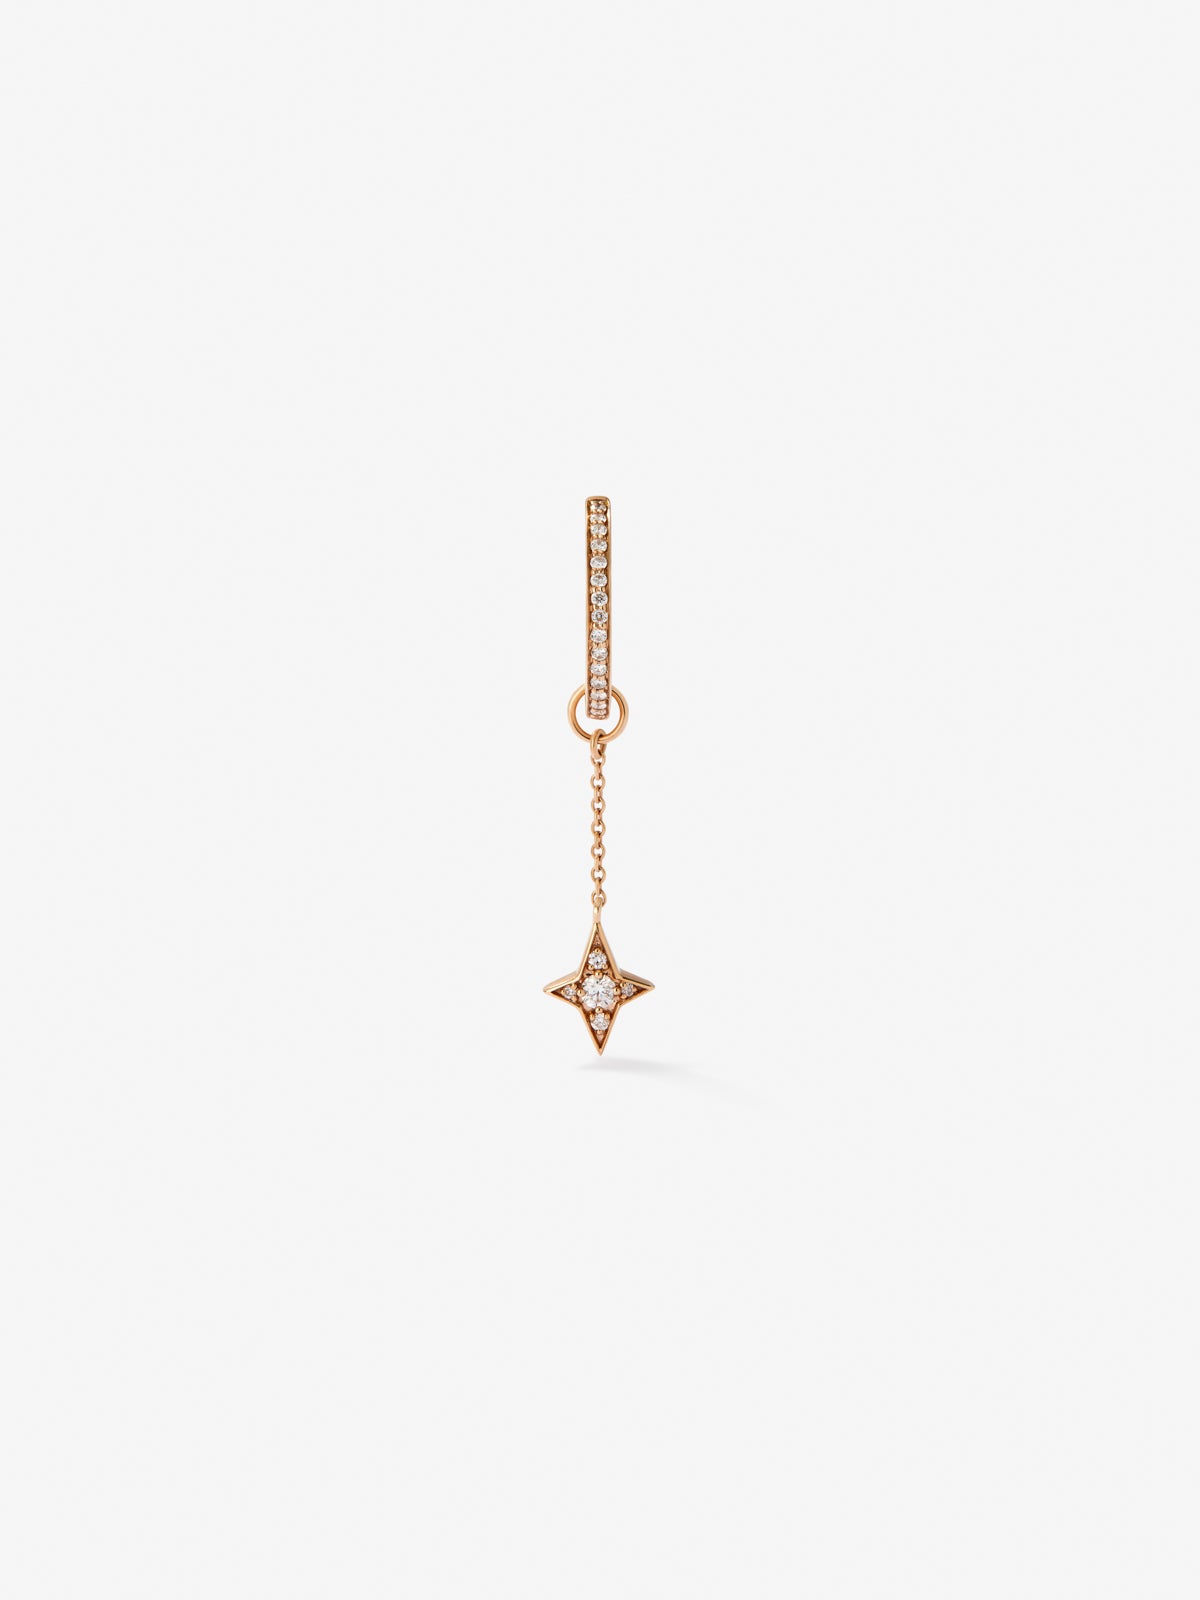 Individual 18K rose gold earring with 20 brilliant-cut diamonds with a total of 0.13 cts